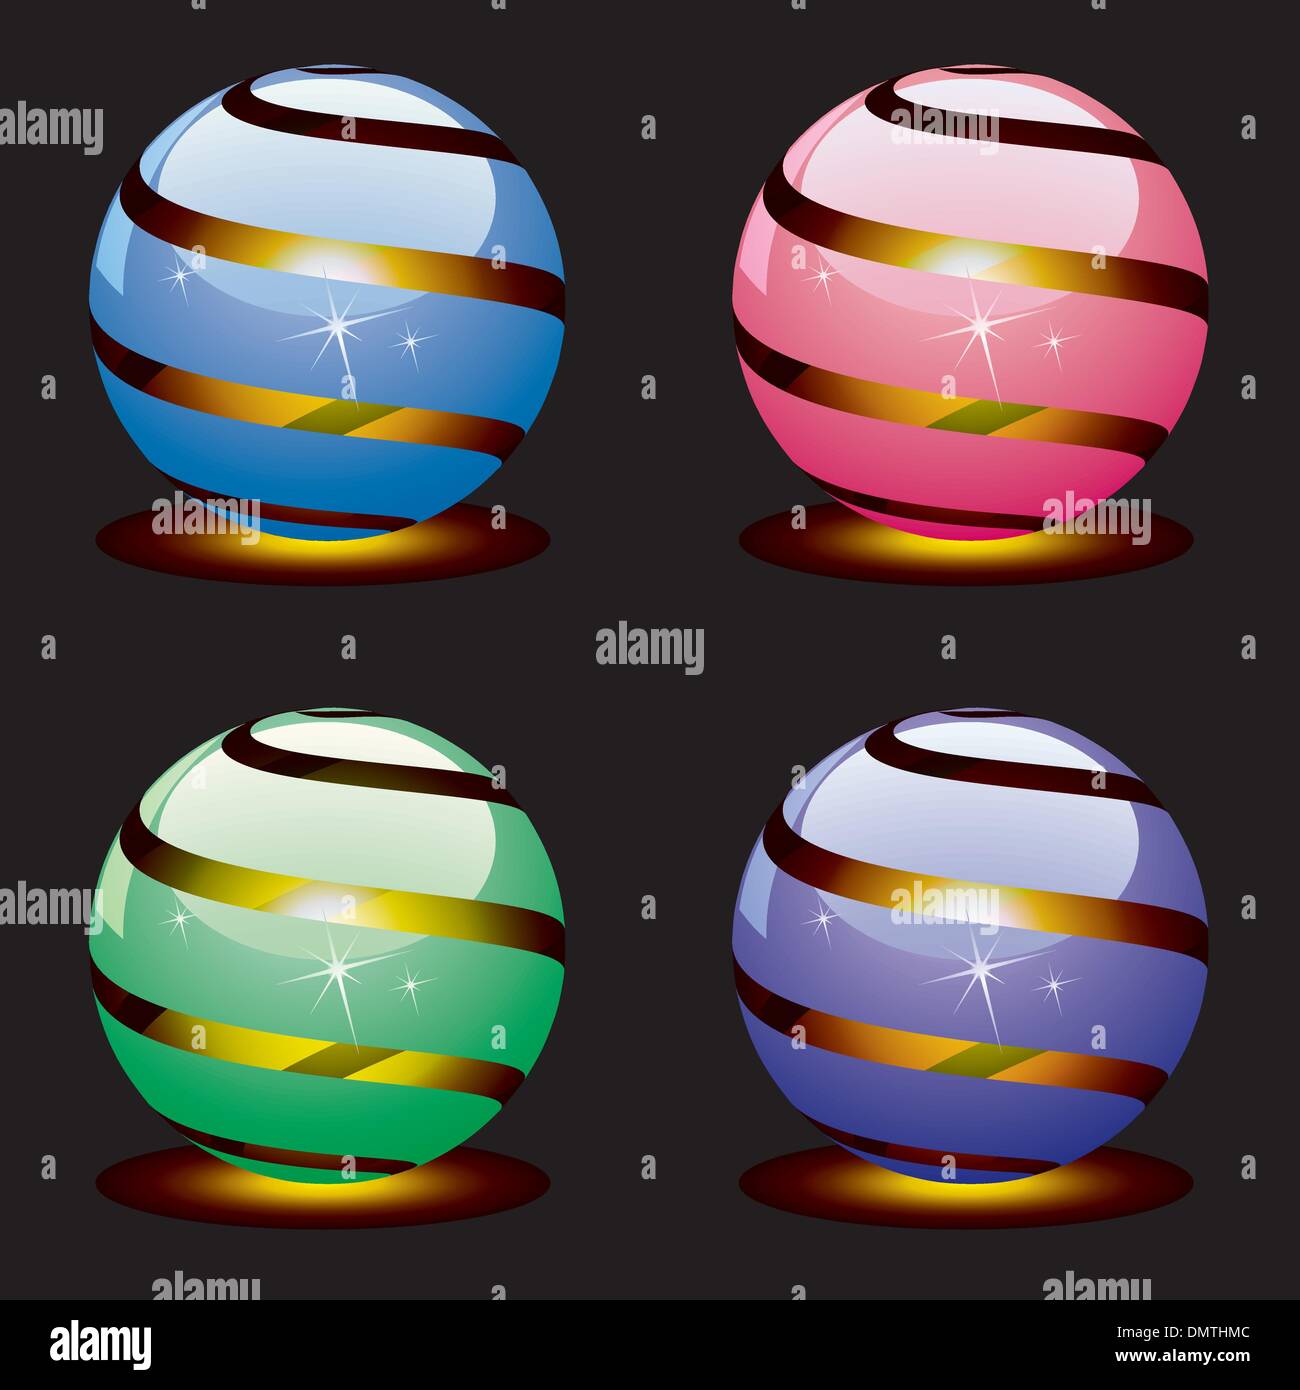 vector 3d shiny globes with light inside. eps 10 Stock Vector